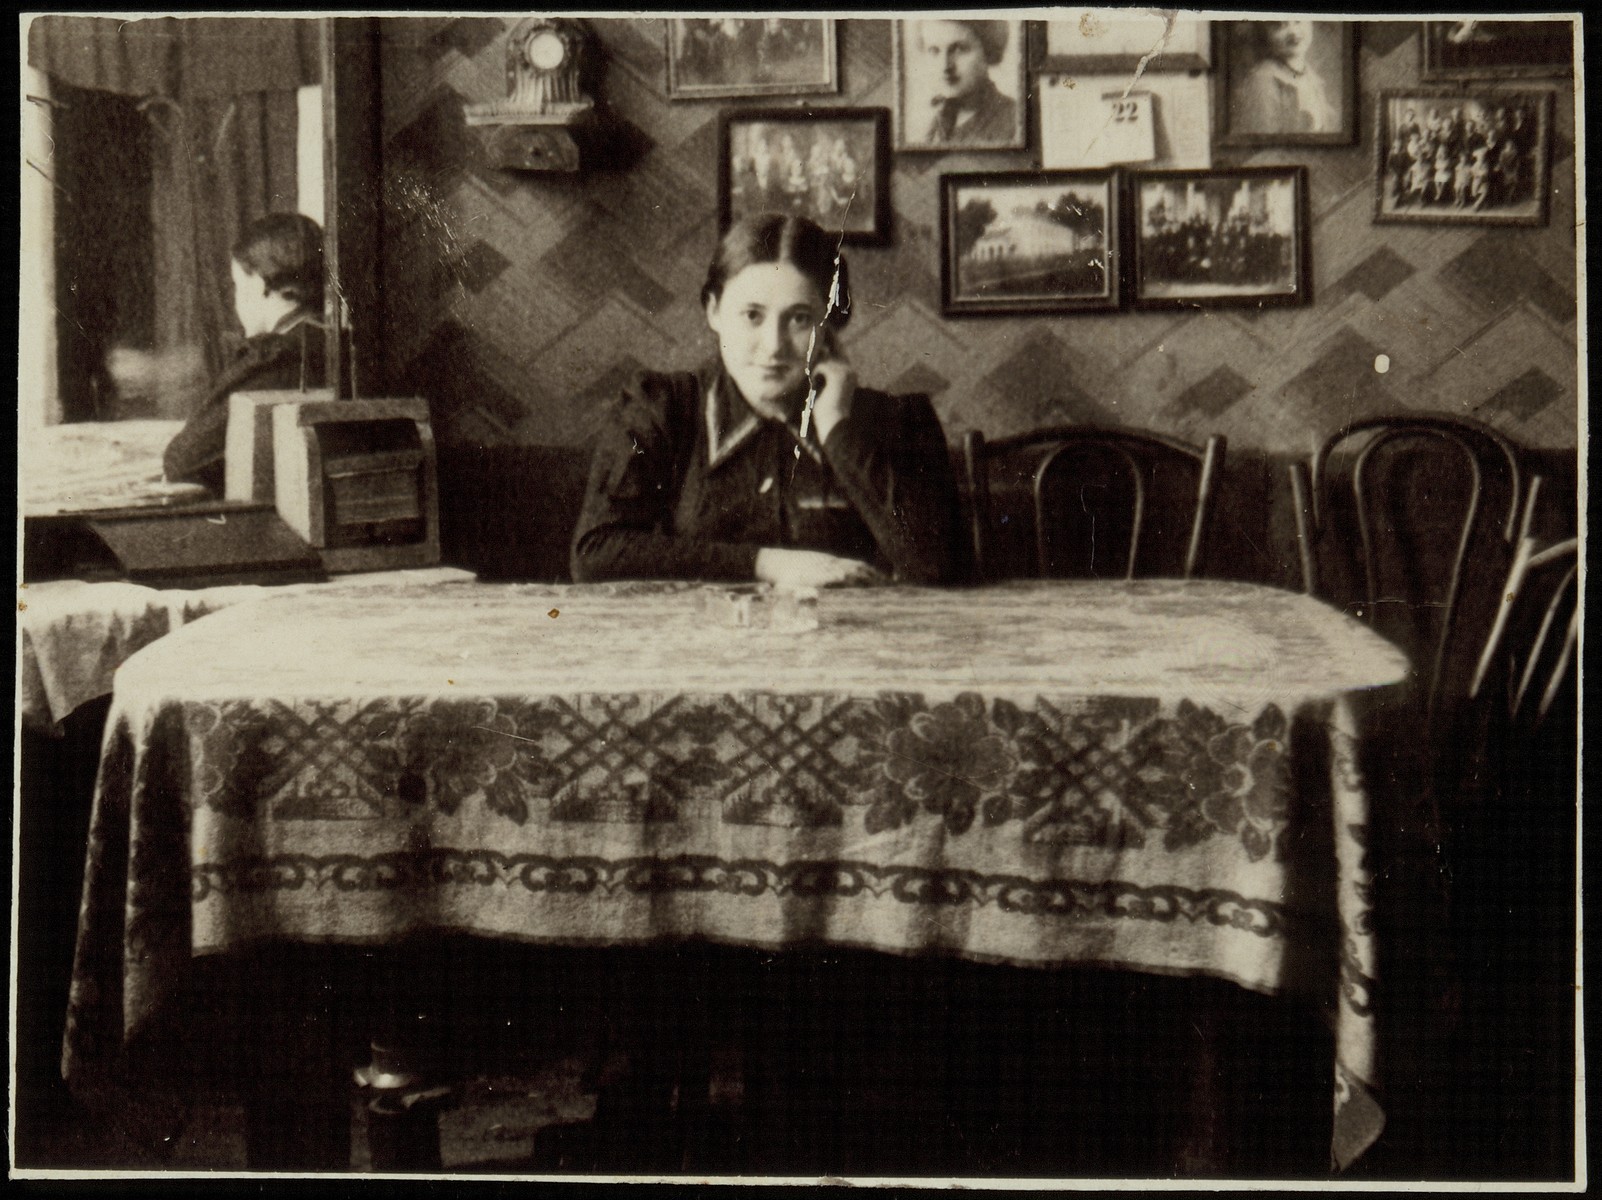 Rivka Pruskin Cofnas sits at a dining room table in the house of the photographer, Rephael Lejbowicz.